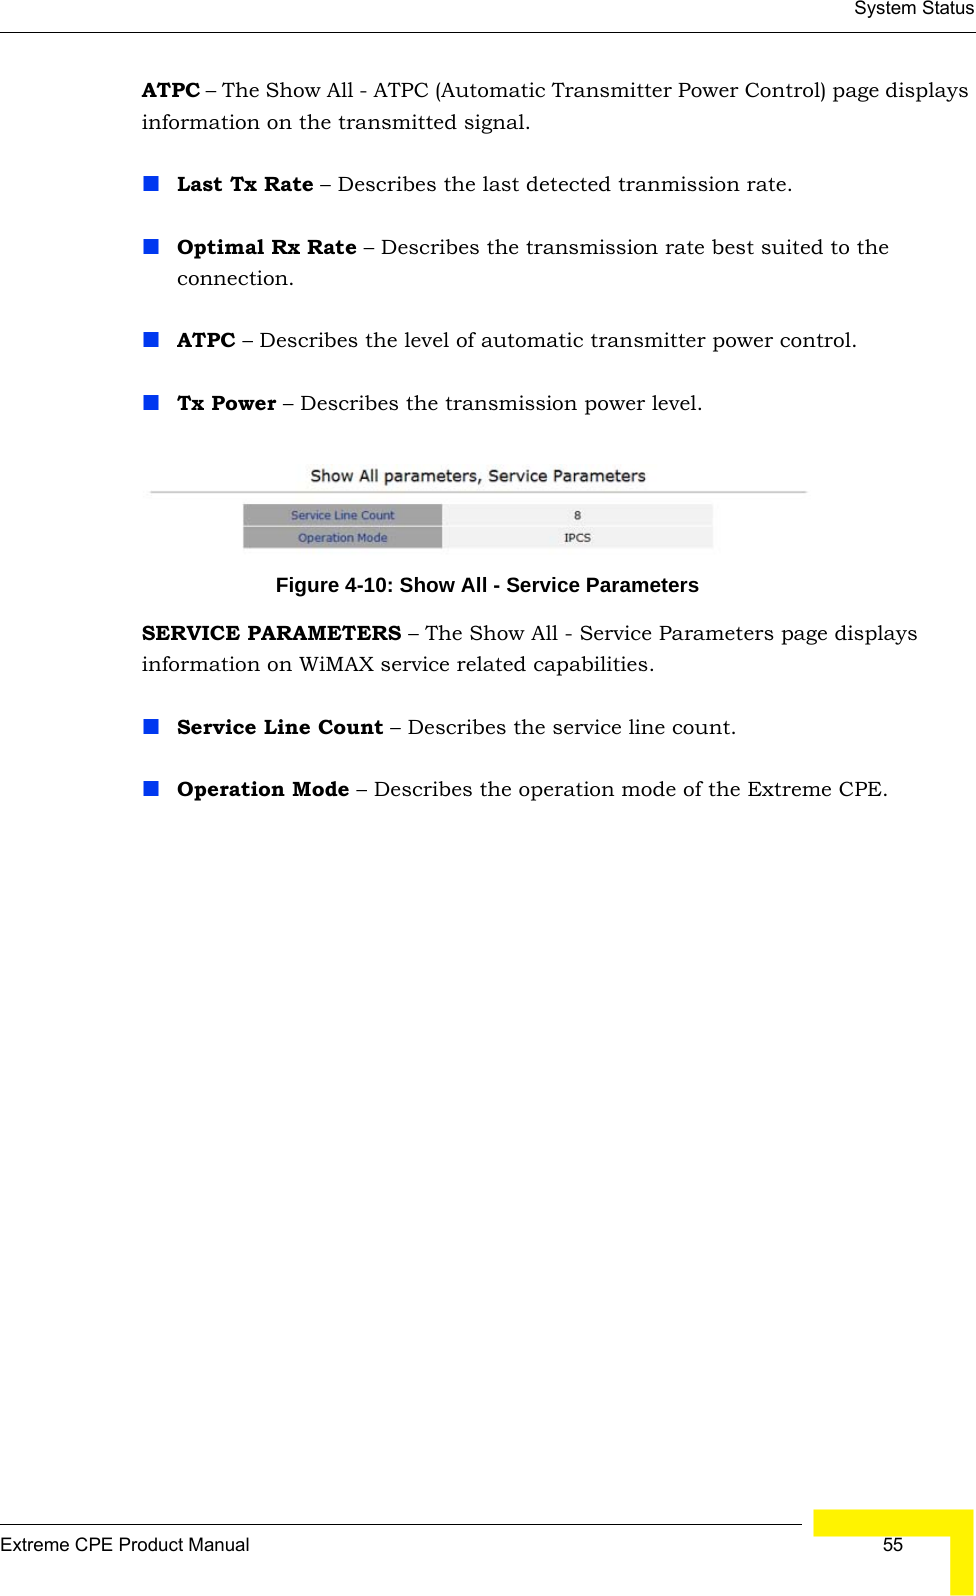 System StatusExtreme CPE Product Manual  55ATPC – The Show All - ATPC (Automatic Transmitter Power Control) page displays information on the transmitted signal.Last Tx Rate – Describes the last detected tranmission rate.Optimal Rx Rate – Describes the transmission rate best suited to the connection.ATPC – Describes the level of automatic transmitter power control.Tx Power – Describes the transmission power level.Figure 4-10: Show All - Service ParametersSERVICE PARAMETERS – The Show All - Service Parameters page displays information on WiMAX service related capabilities.Service Line Count – Describes the service line count.Operation Mode – Describes the operation mode of the Extreme CPE.